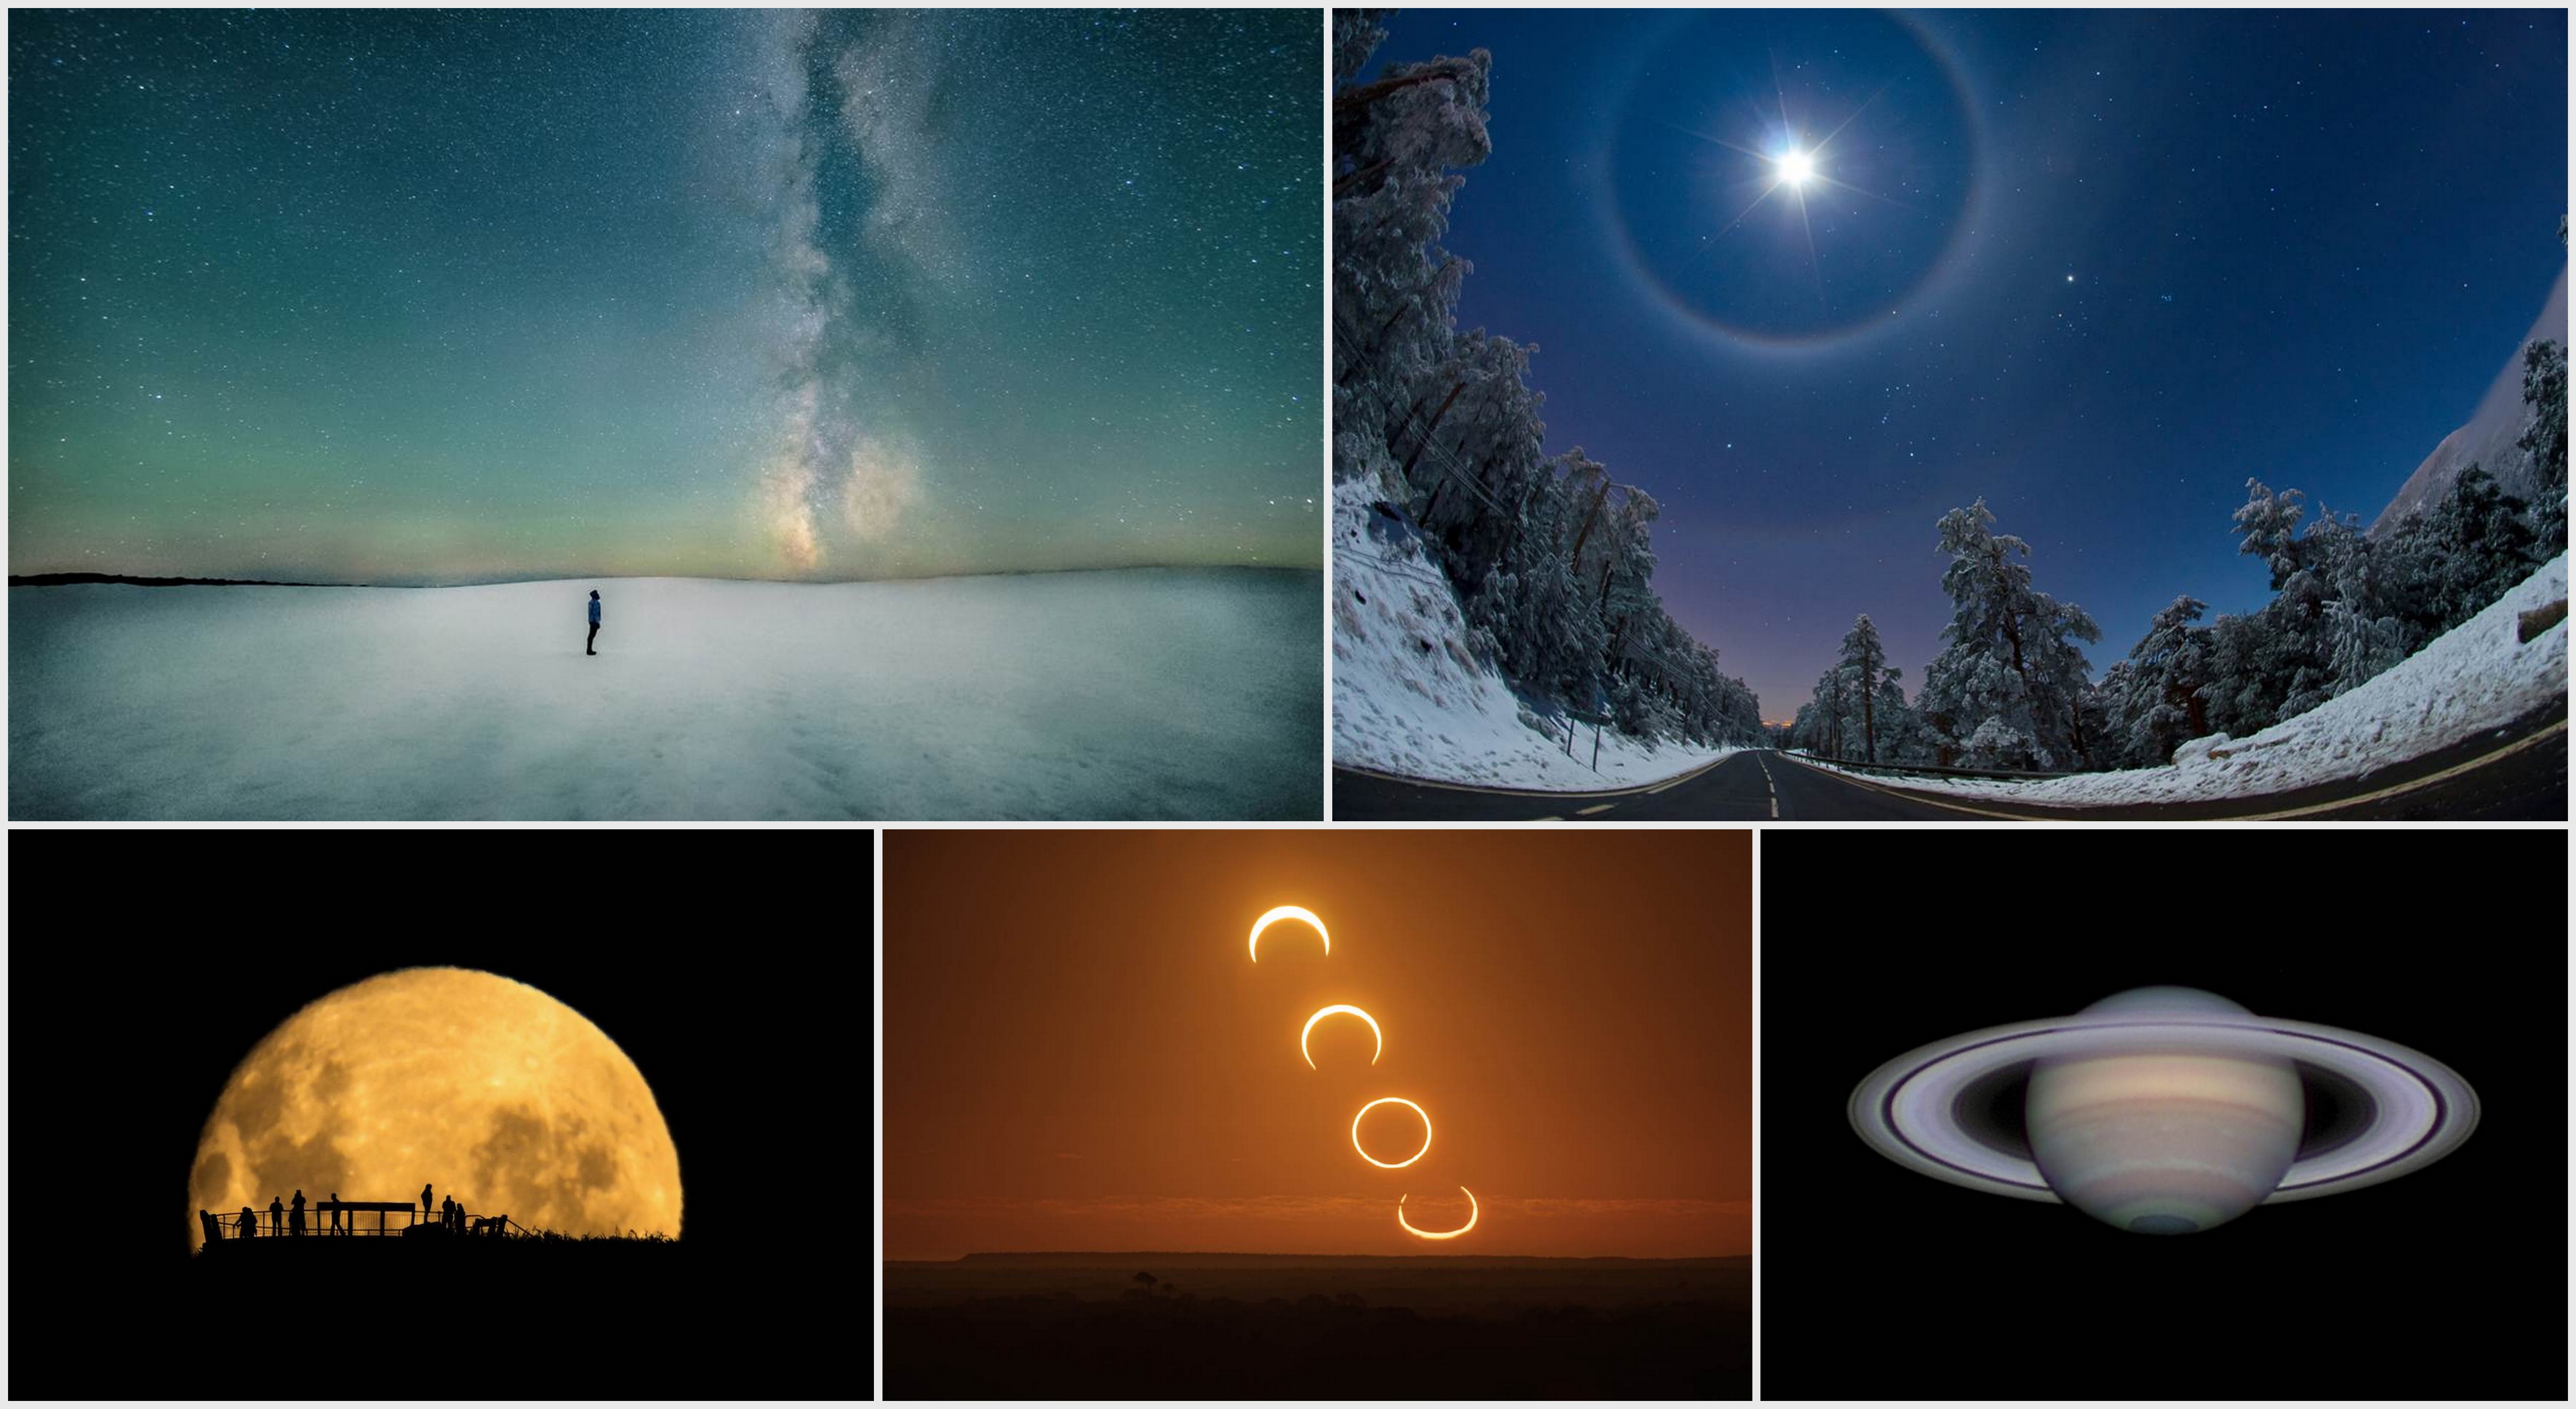 Royal Observatory Greenwich Astronomy Photographer of the Year 2013